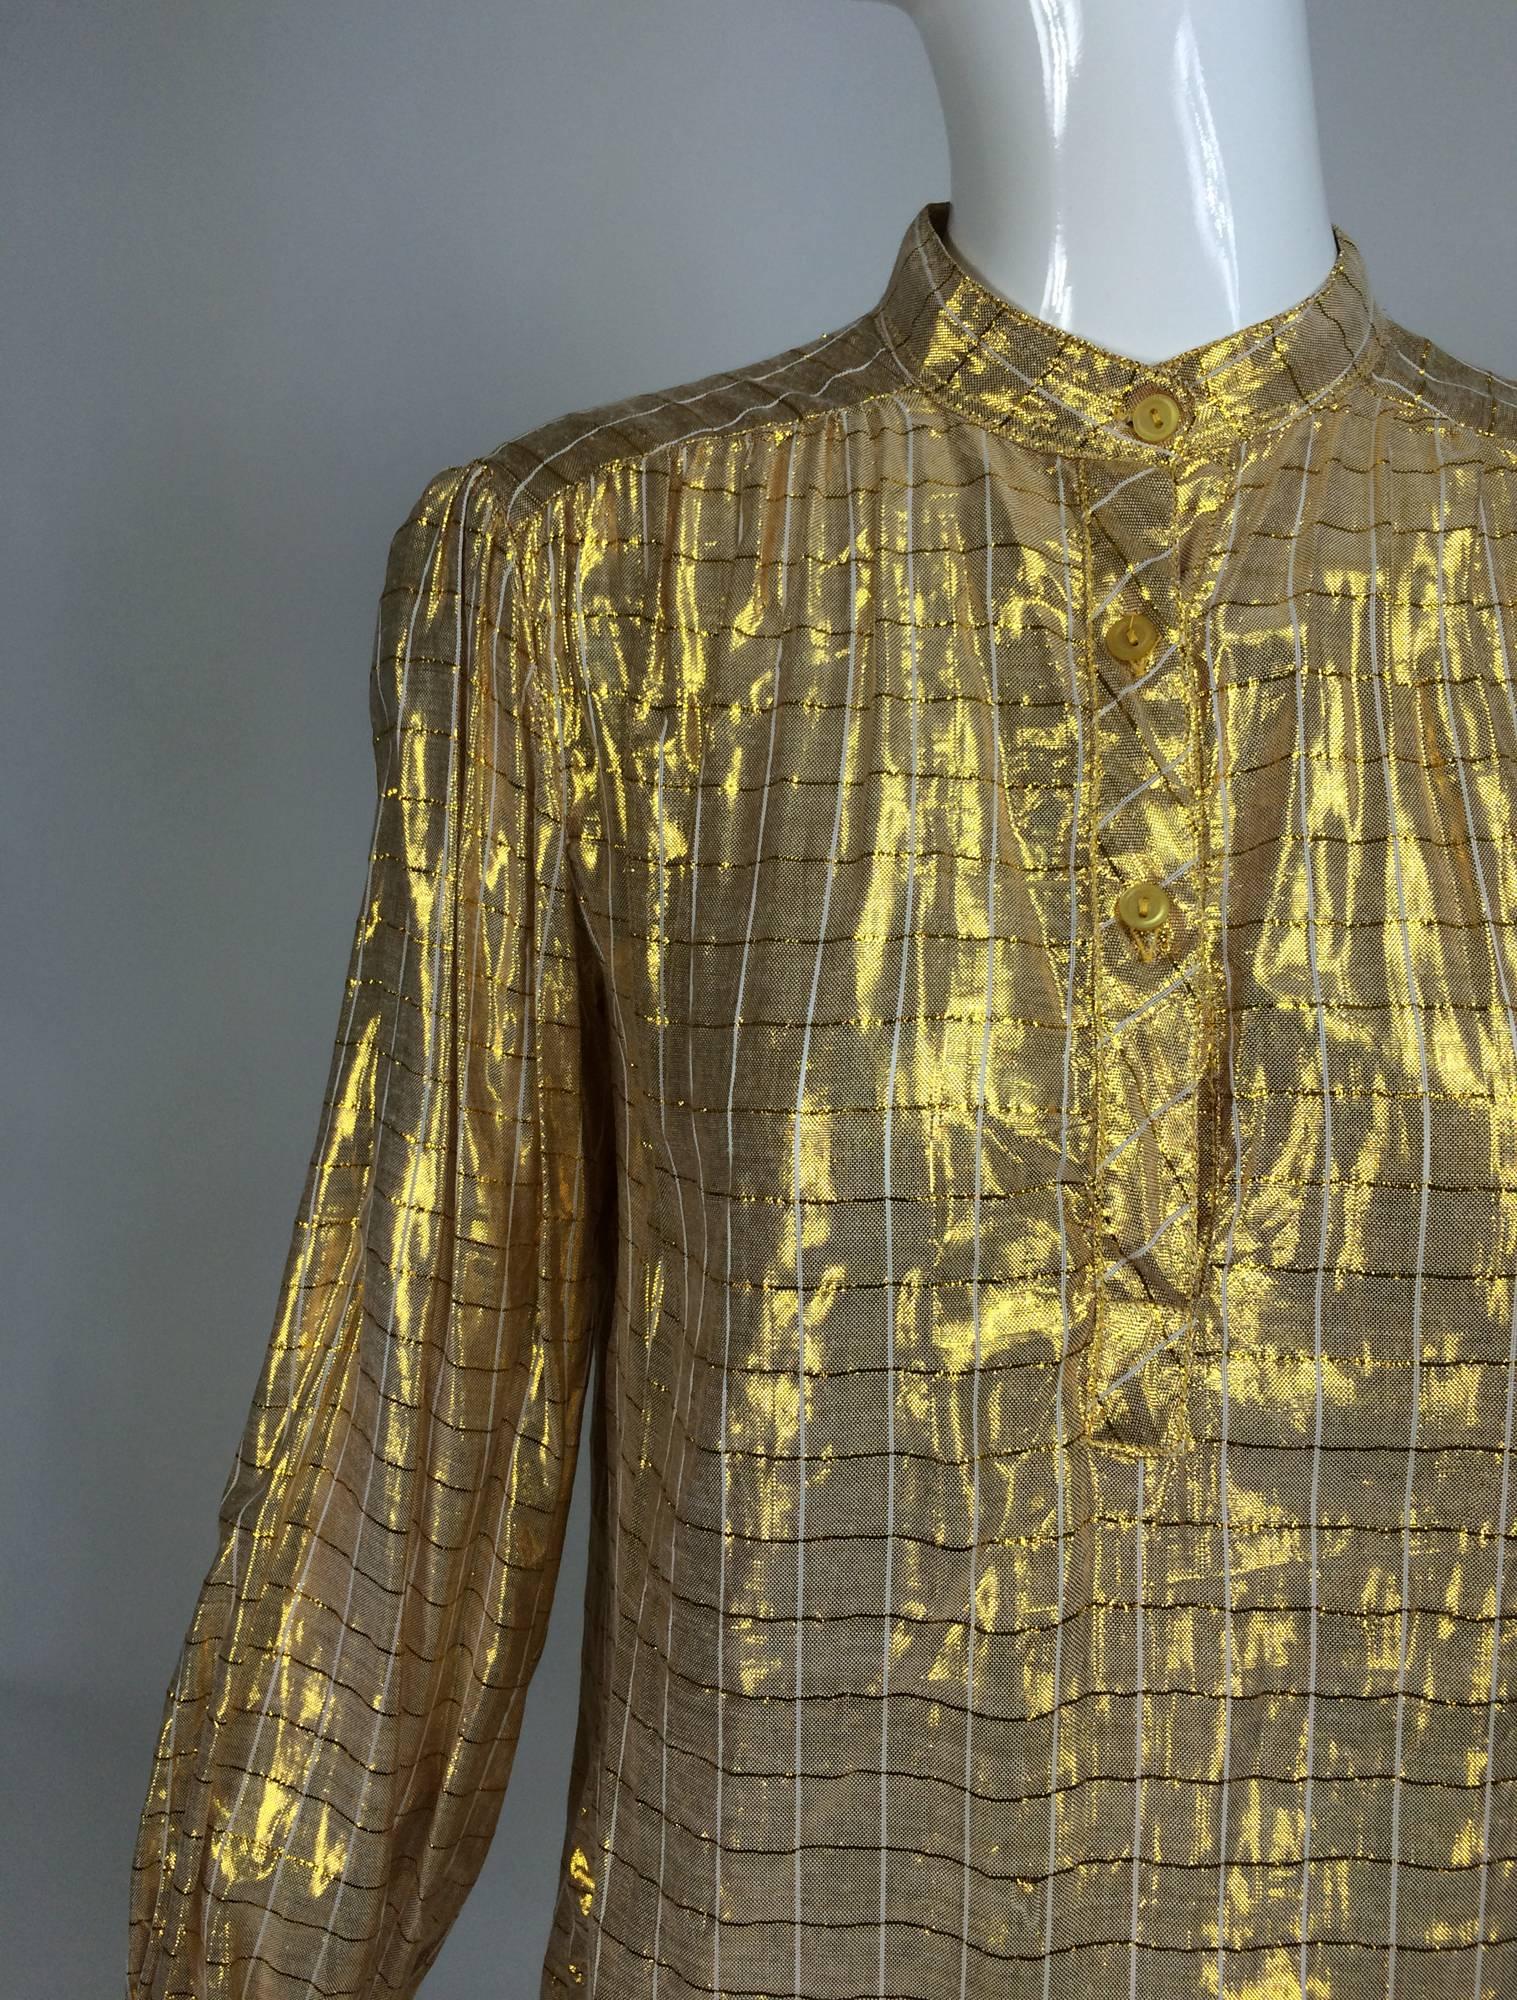 Vintage Gauze Shimmery Gold Yoke Back tunic Top India 1970s Unworn...Tunic length shirt in a light-as-air cotton fabric that is woven with gold metallic thread...Banded collar shirt has a yoke shoulder front & back, long sleeves with banded button